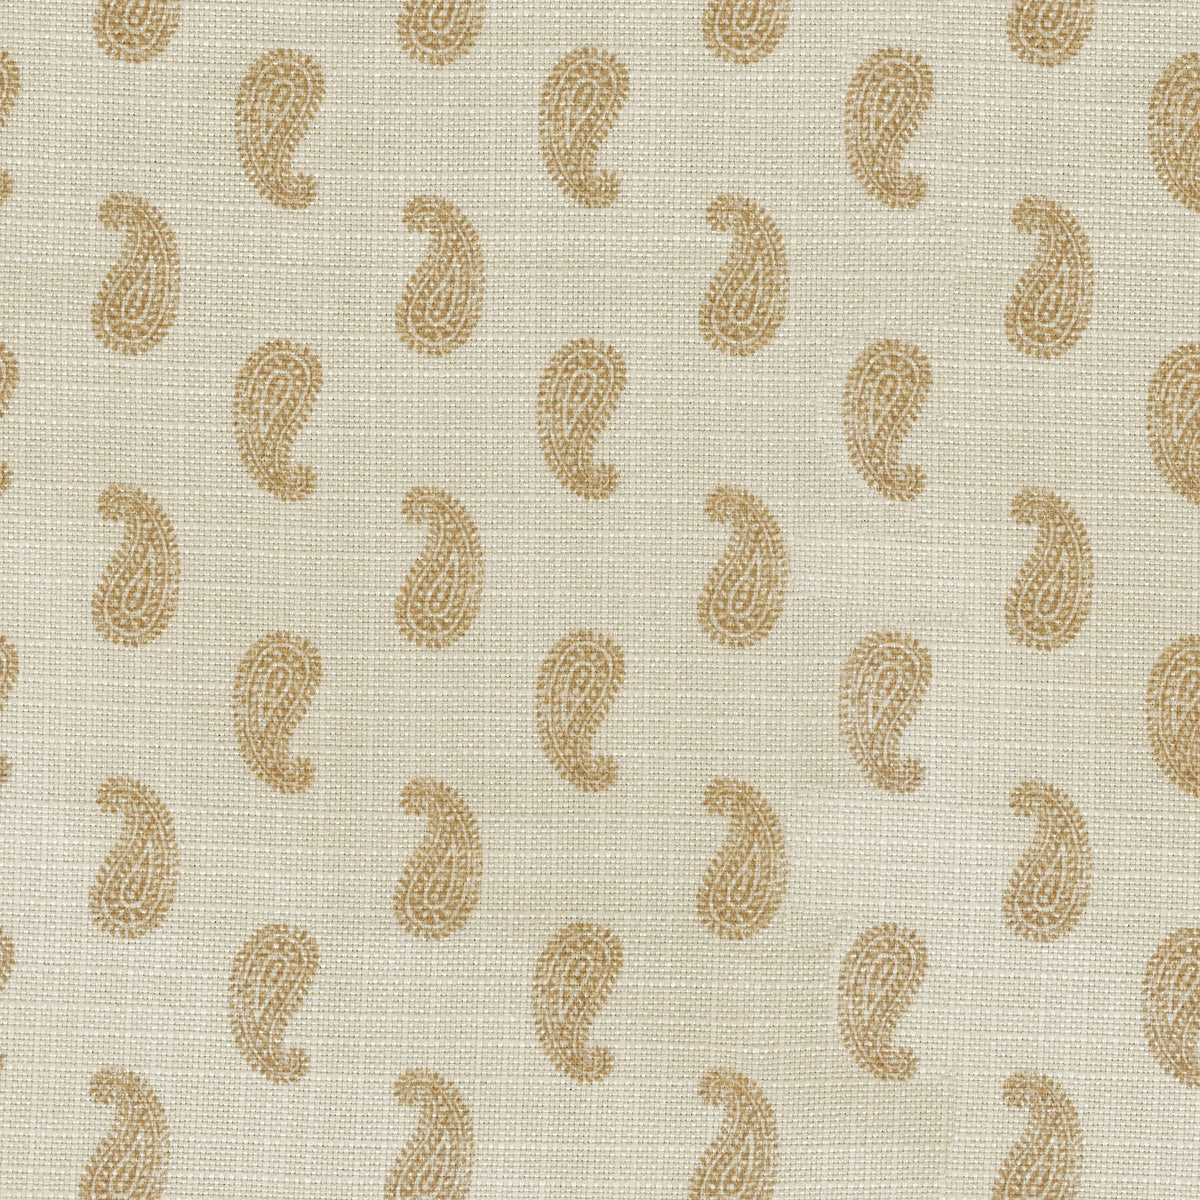 Performance + Simple Stamp - Gold 409223 Fabric Swatch